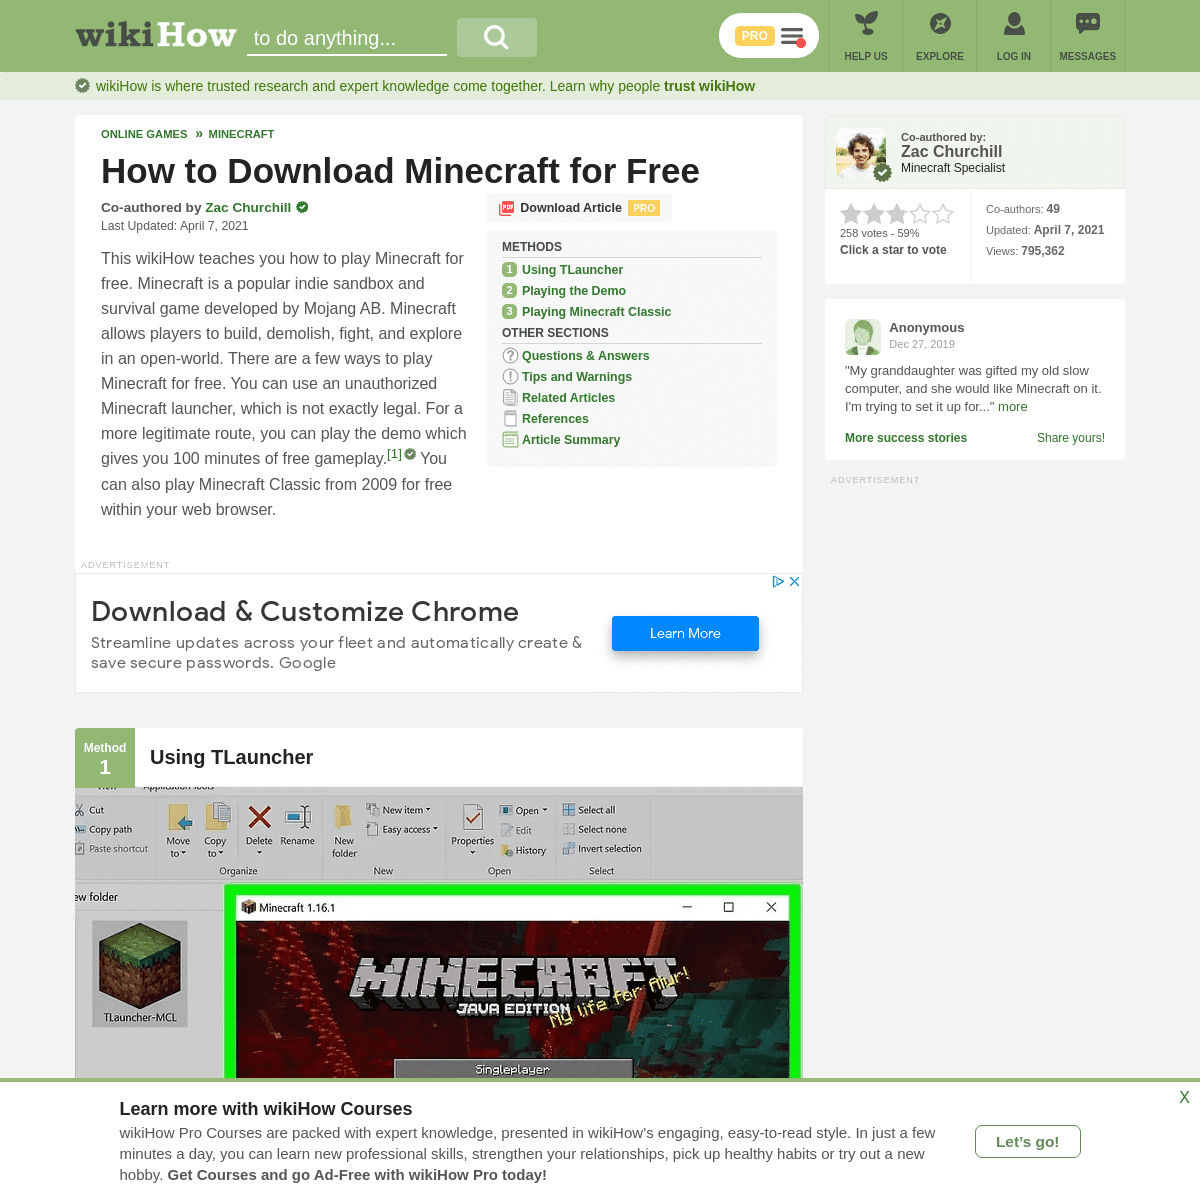 A complete backup of https://www.wikihow.com/Download-Minecraft-for-Free